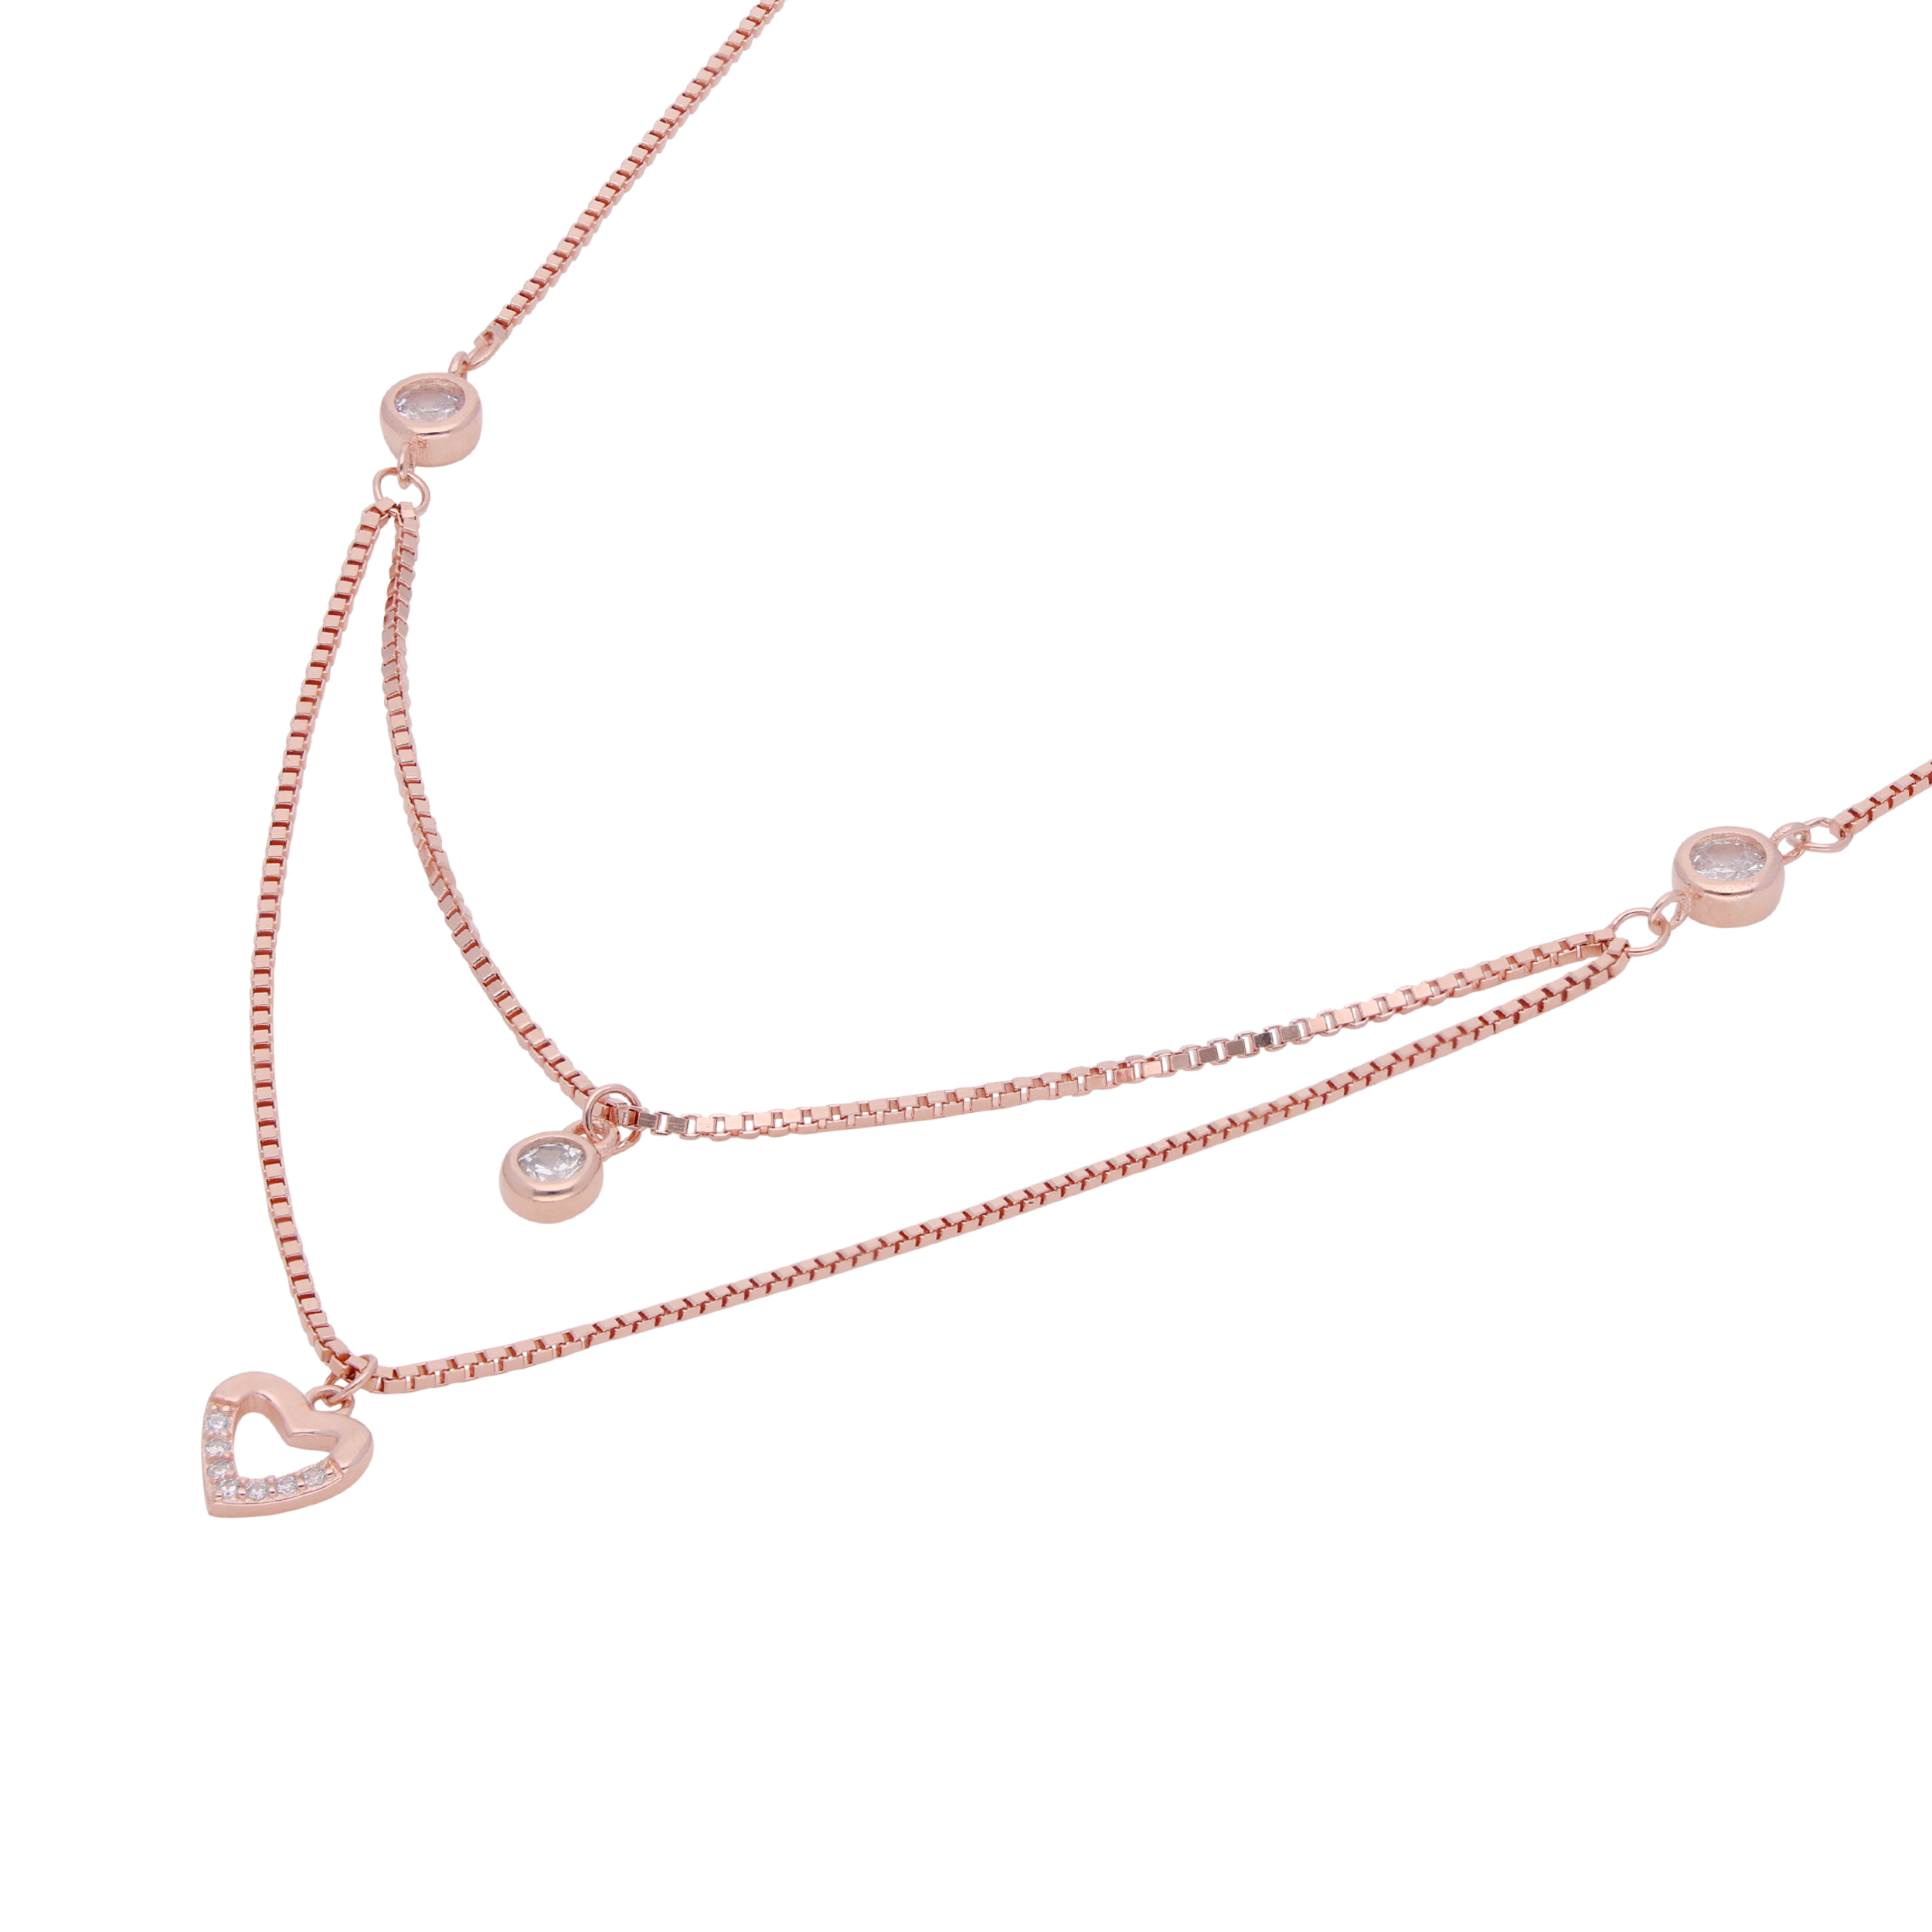 Layered Rose Gold Chain with Heart Pendant Chain: A Symbol of Love and Elegance | SKU: 0019281988, 0019282046, 0019281940